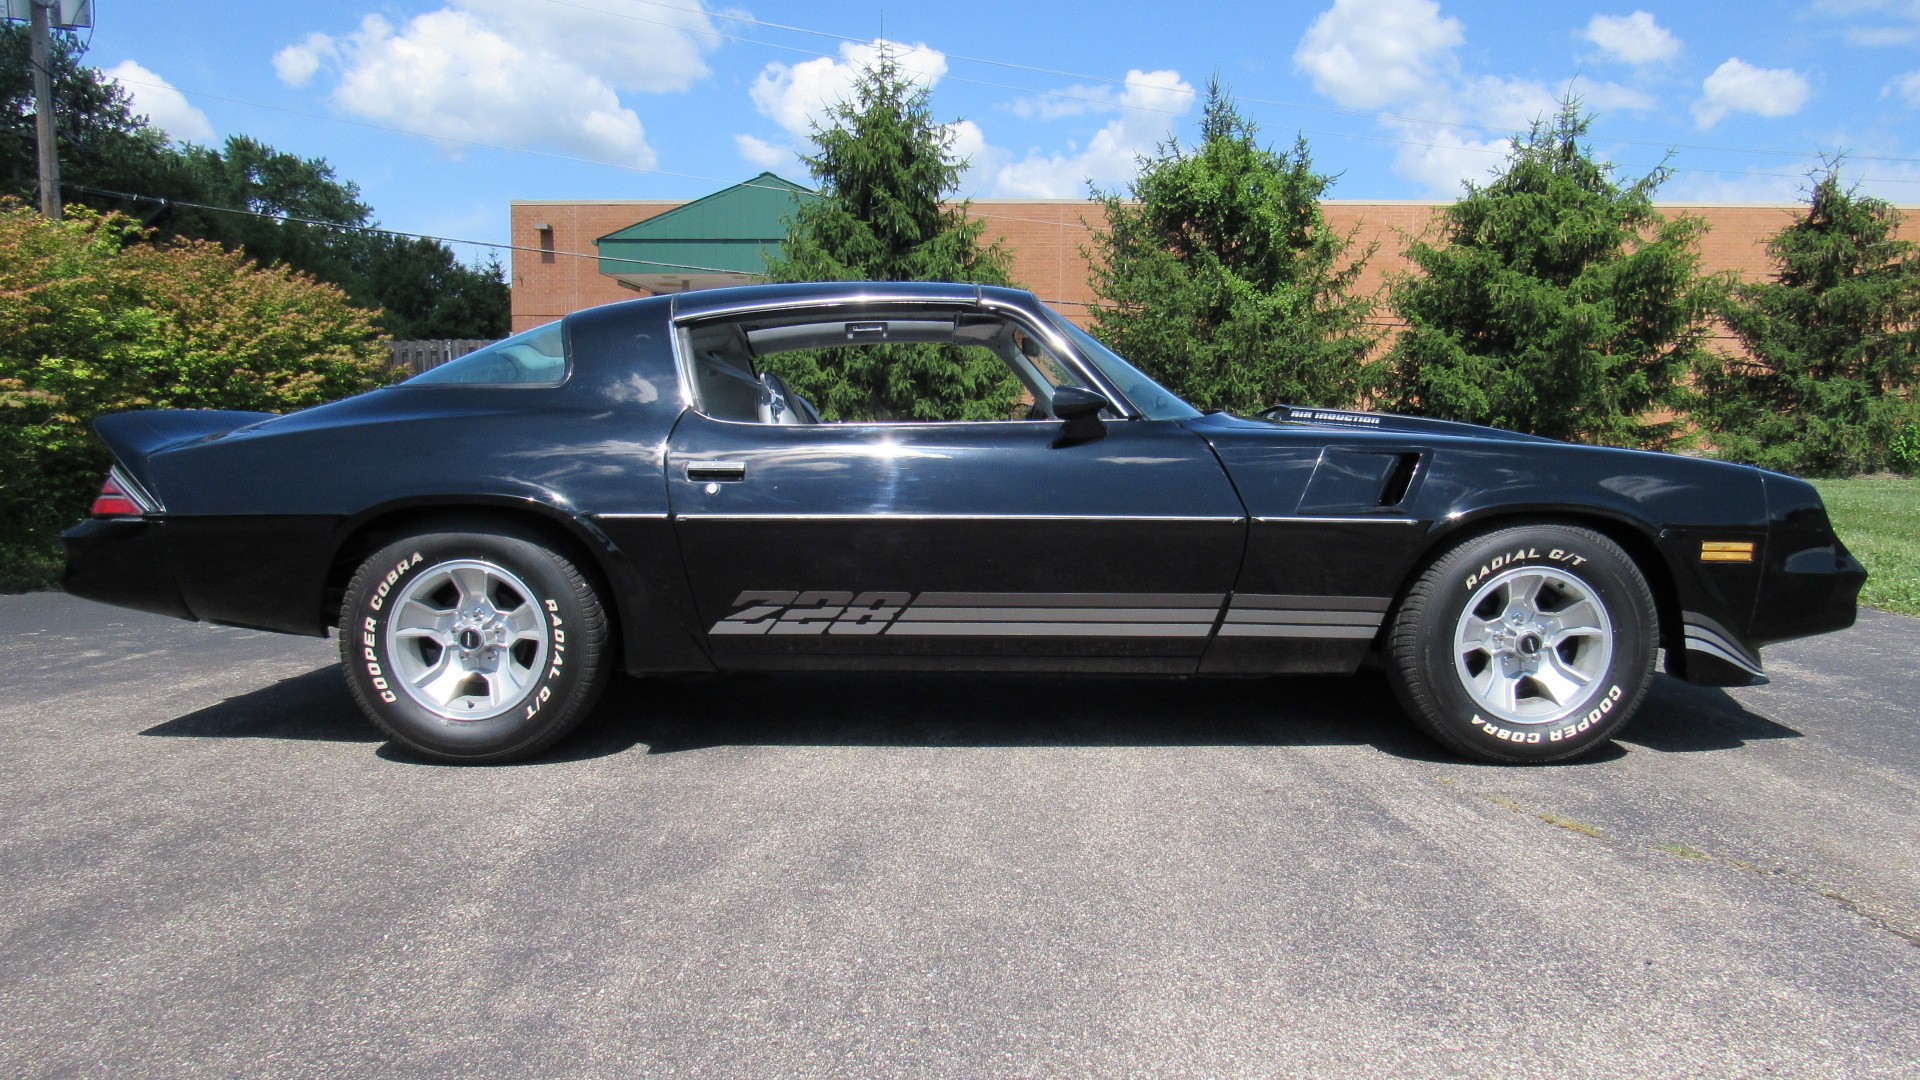 1981 Chevy Z28, T-Tops, Auto, 95K Miles, Restored, SOLD!